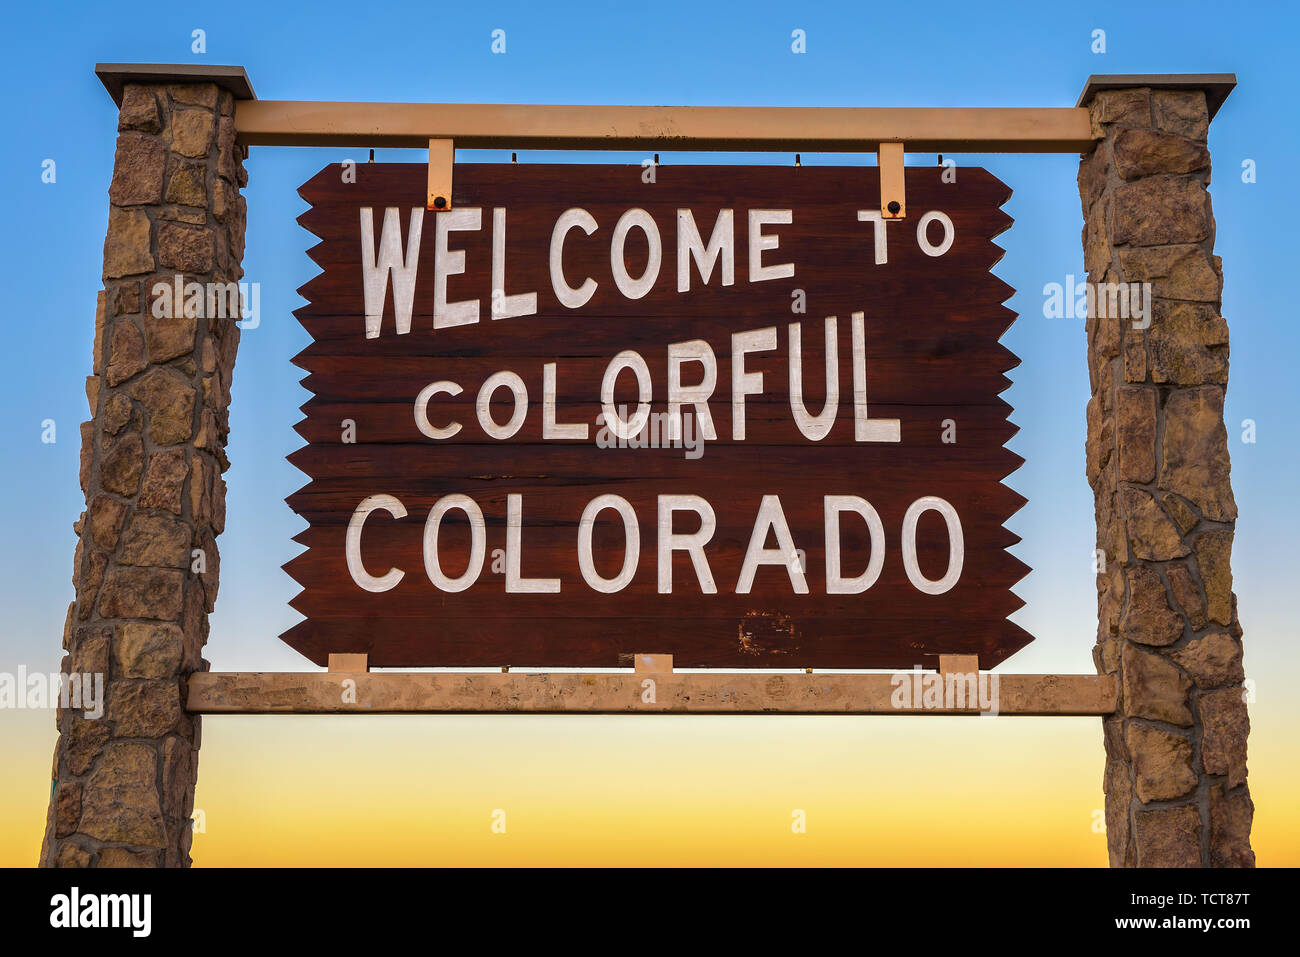 Welcome to colorful Colorado road sign Stock Photo